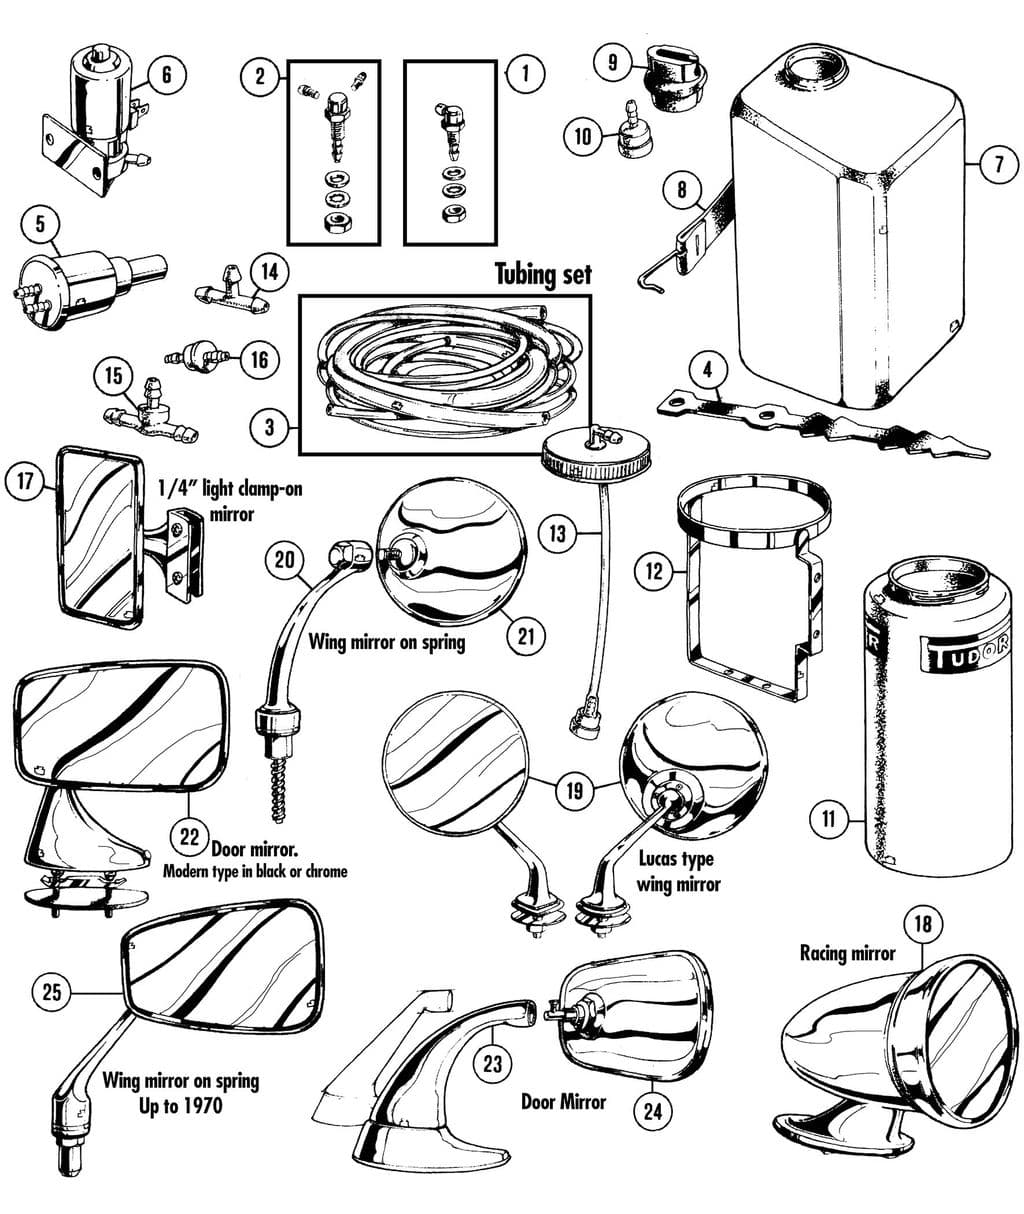 MGC 1967-1969 - Water containers | Webshop Anglo Parts - Windscreen wash & mirrors - 1